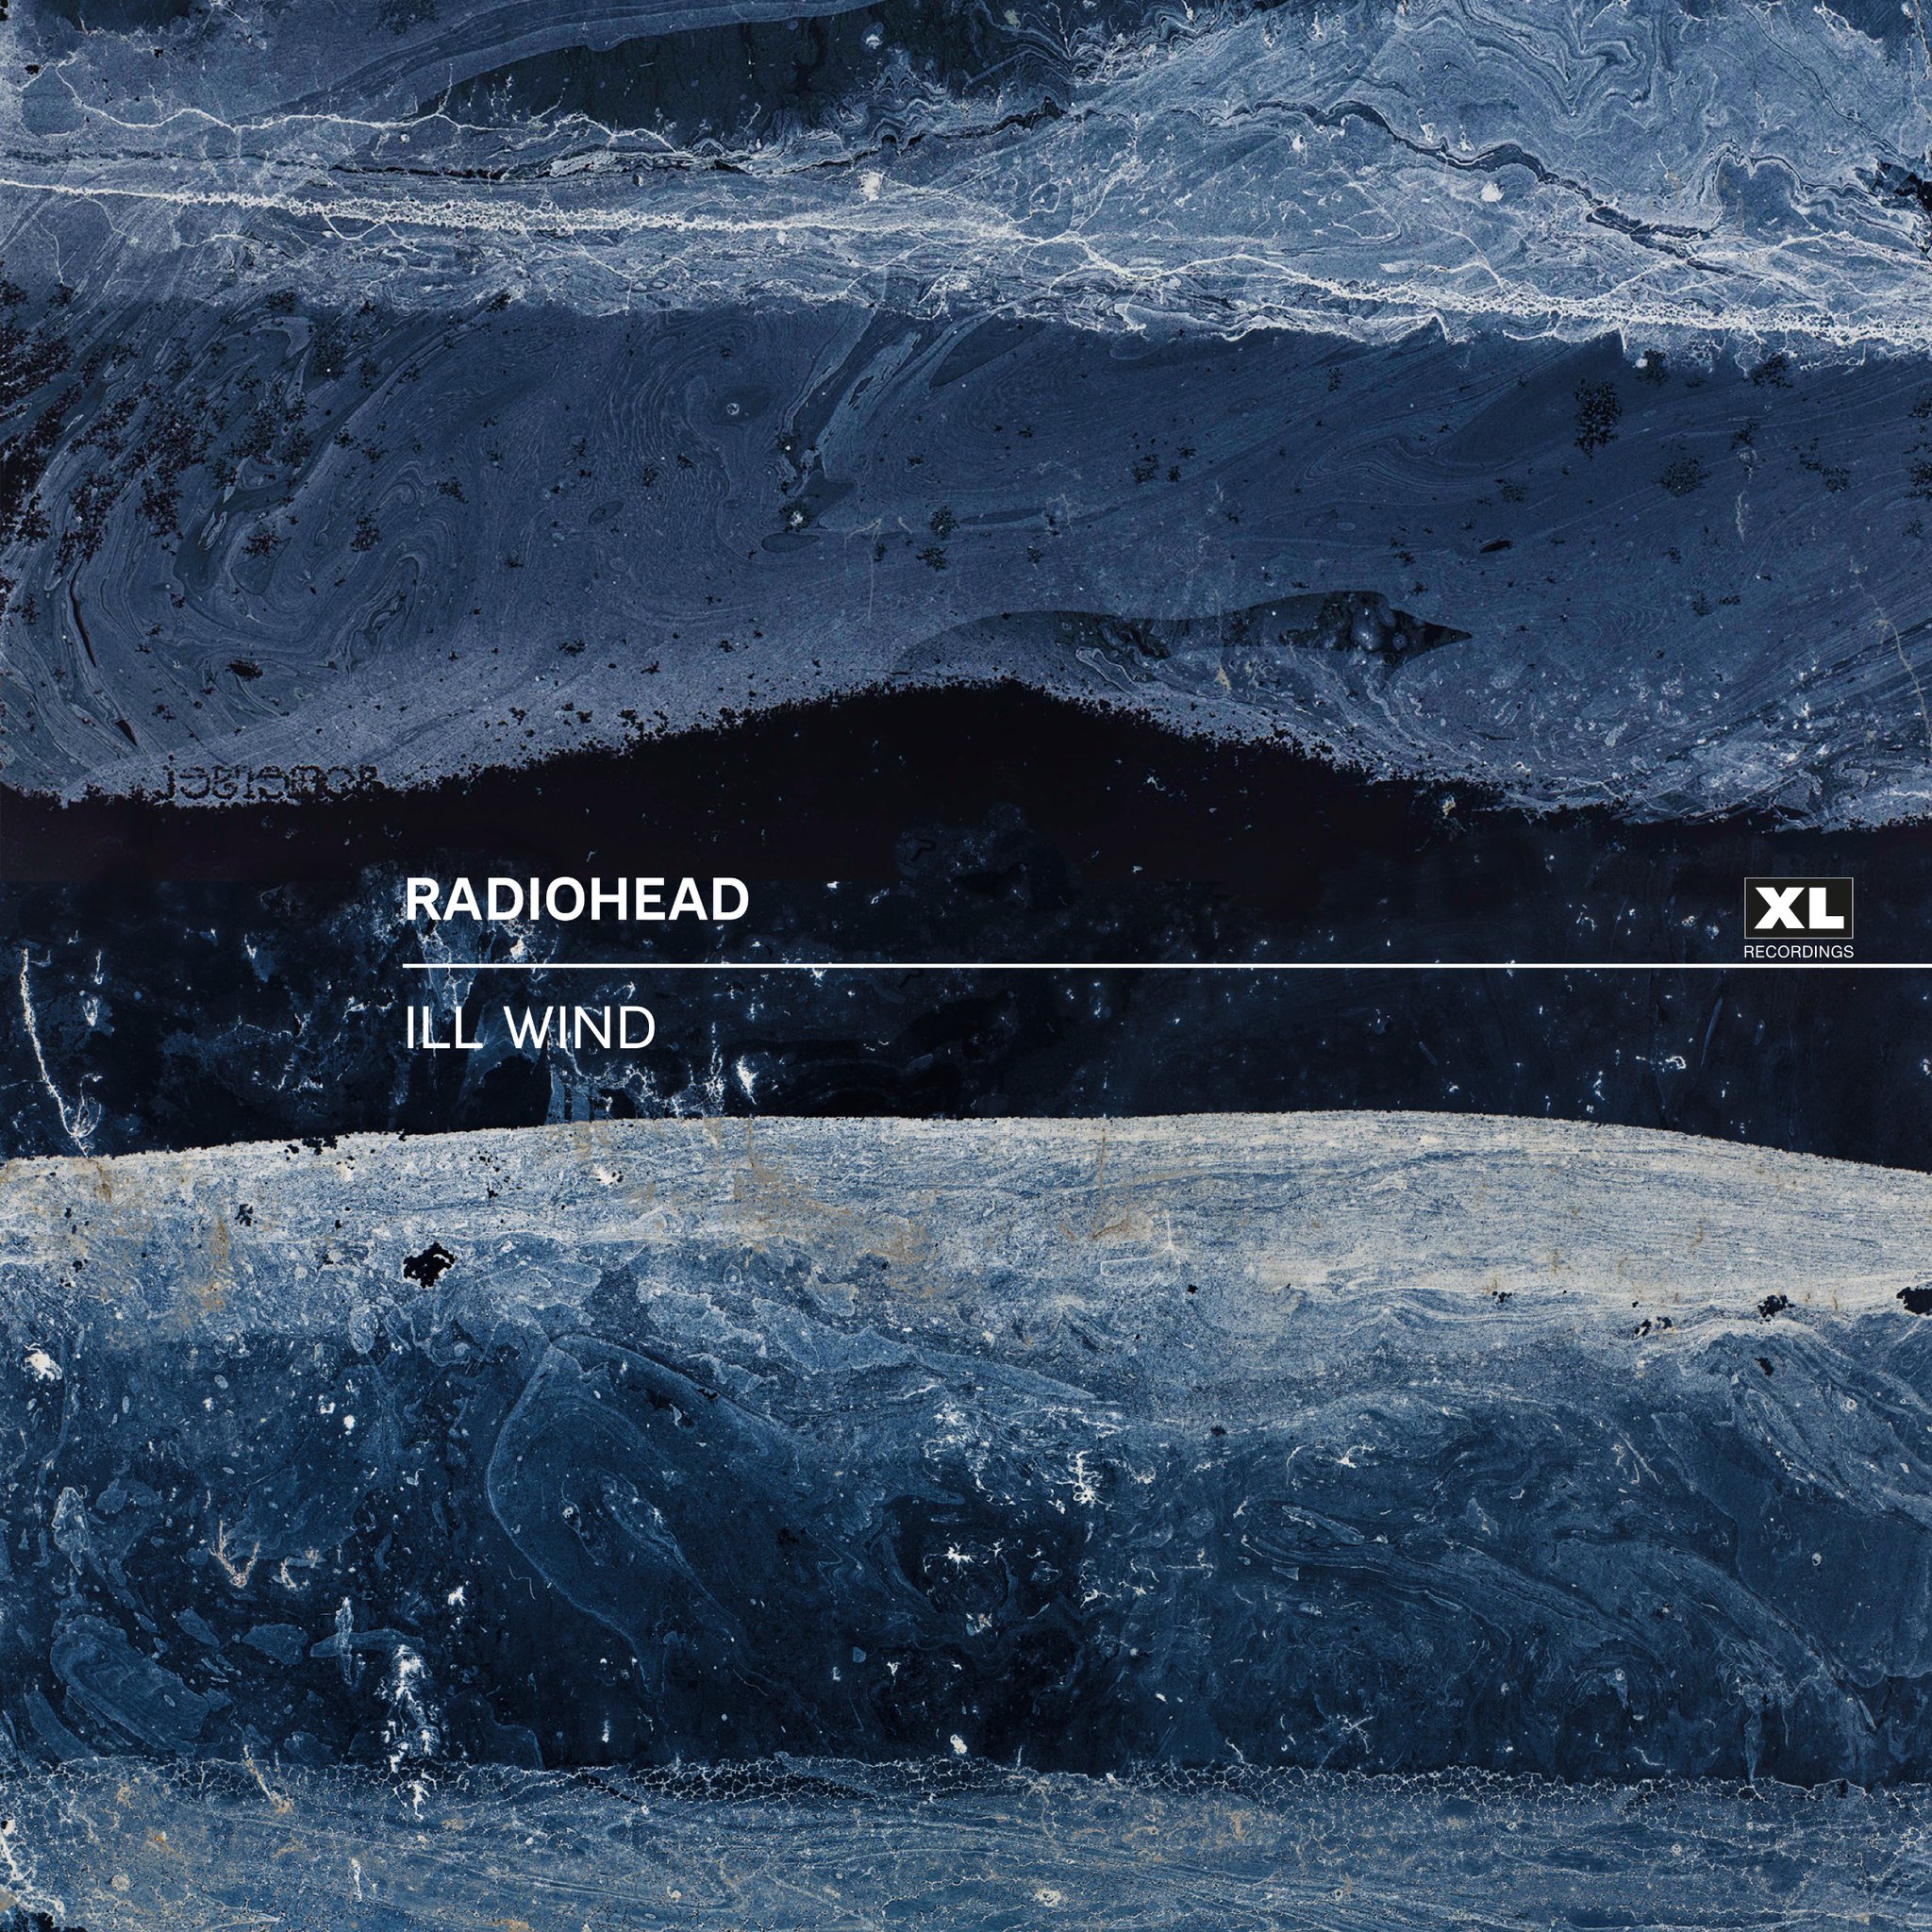 Radiohead Releases "Ill Wind" For Streaming/Download - LIVE Music Blog